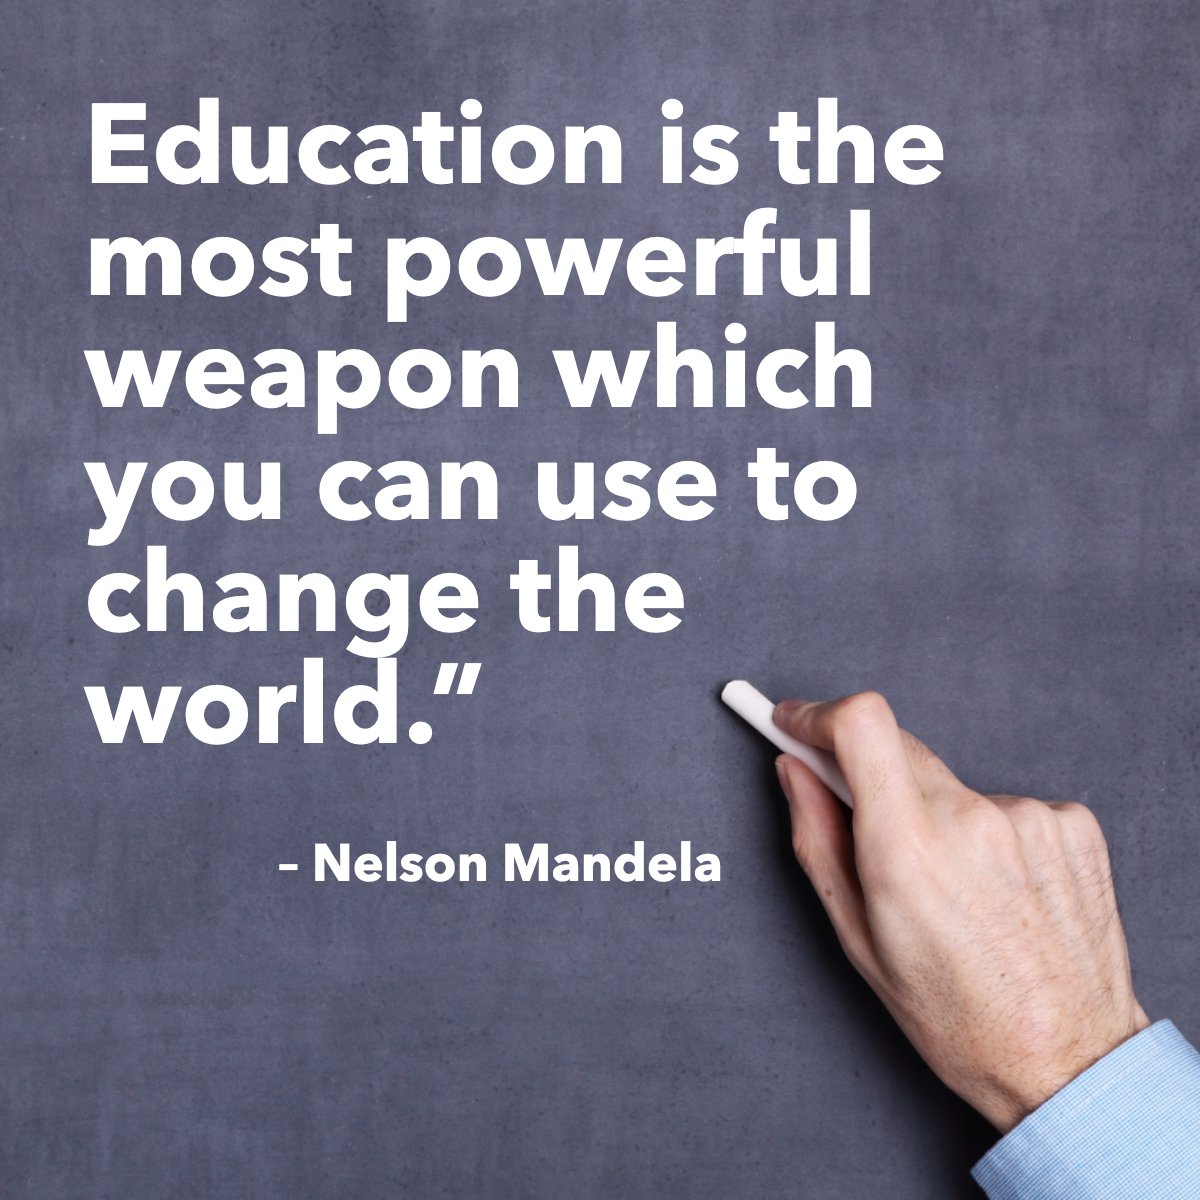 'Education is the most powerful weapon which you can use to change the world' 
— Nelson Mandela  📖

#educationquotes #wisdomquote #wisdomoftheday #quotegram #quoteoftheday #nelsonmandela #educationispower
 #BeautifulSouthEastValleyHomes